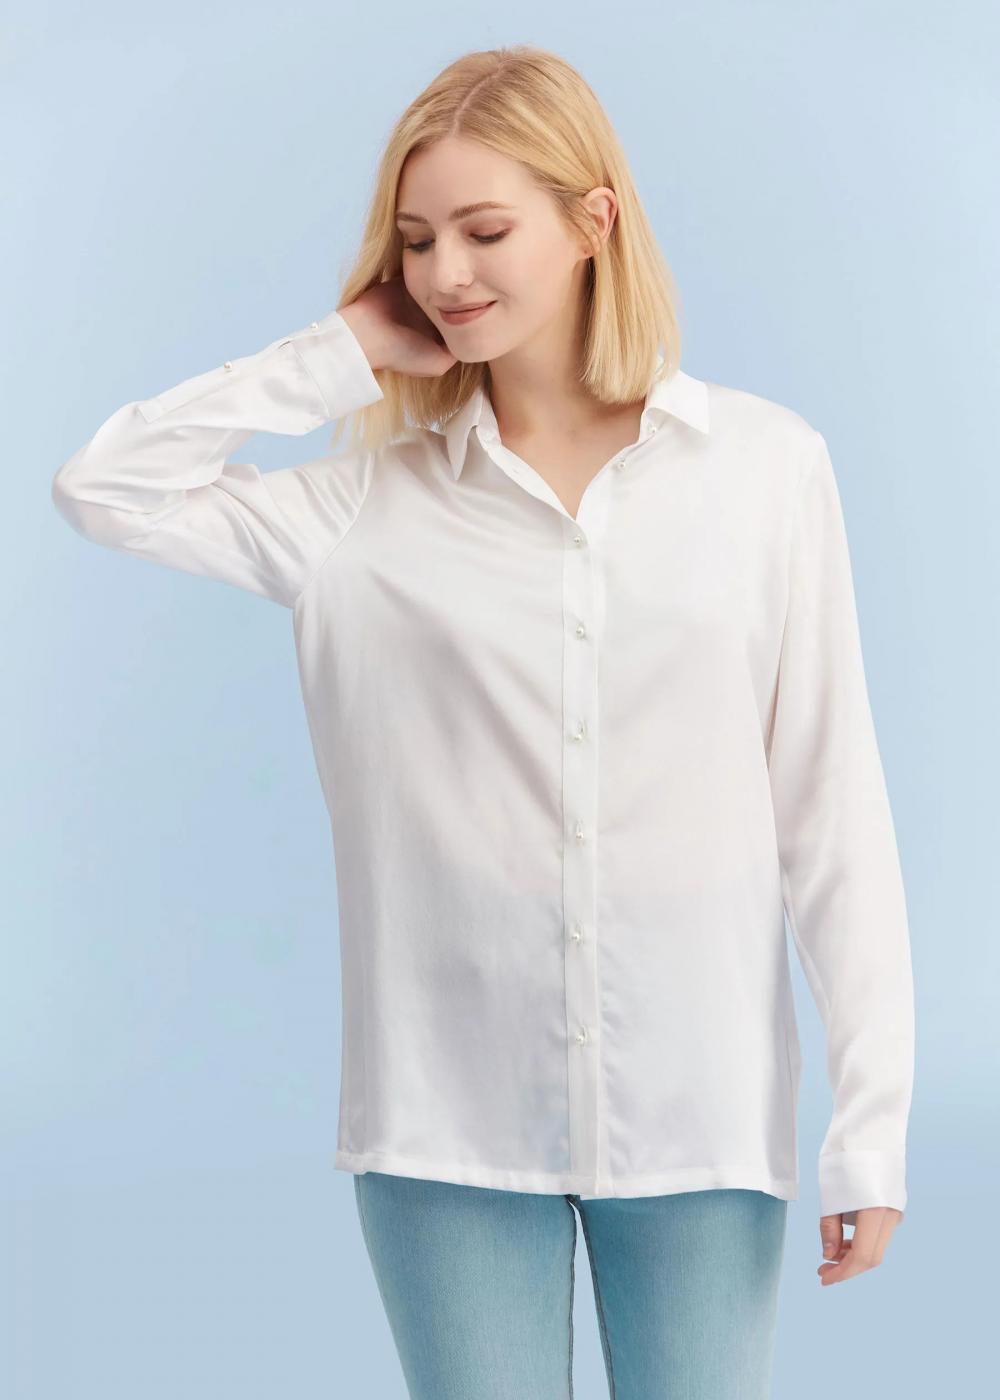 Classic Pearl Button Down Silk Shirts for Women Basic Formal Office Vintage Long Sleeve Silk Blouse Tops for Ladies